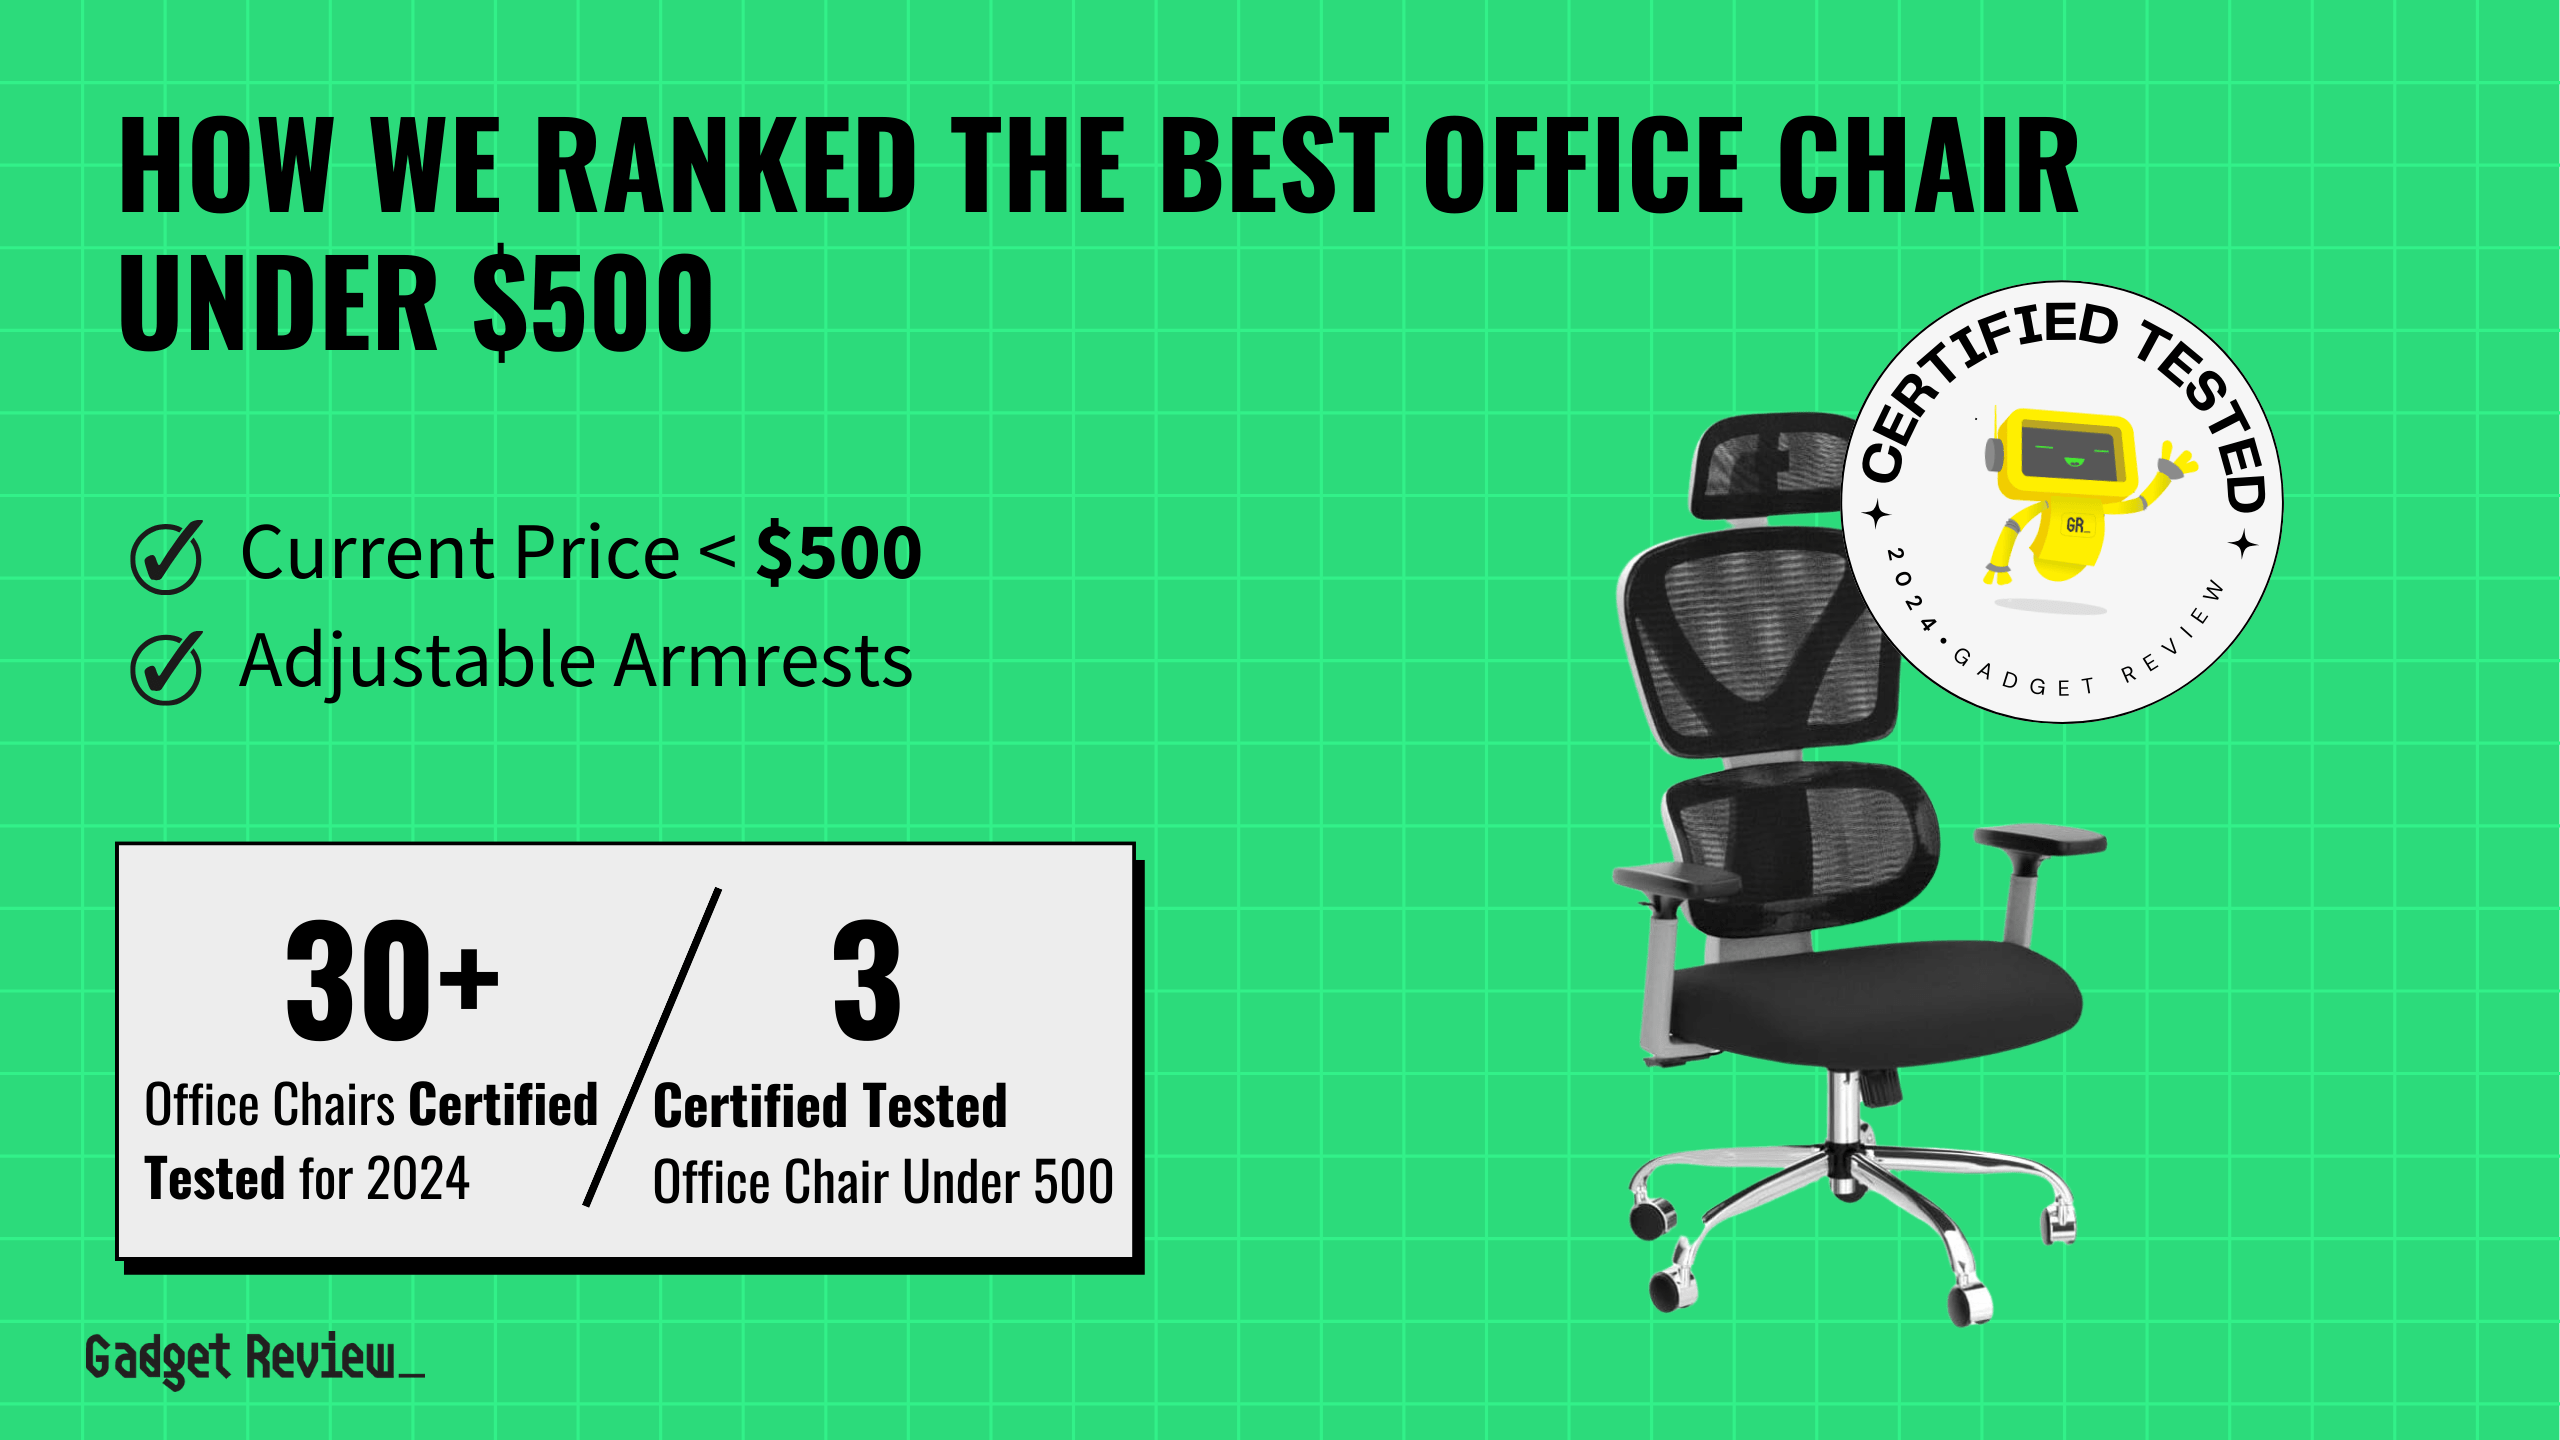 best office chair under 500 guide that shows the top best office chair model